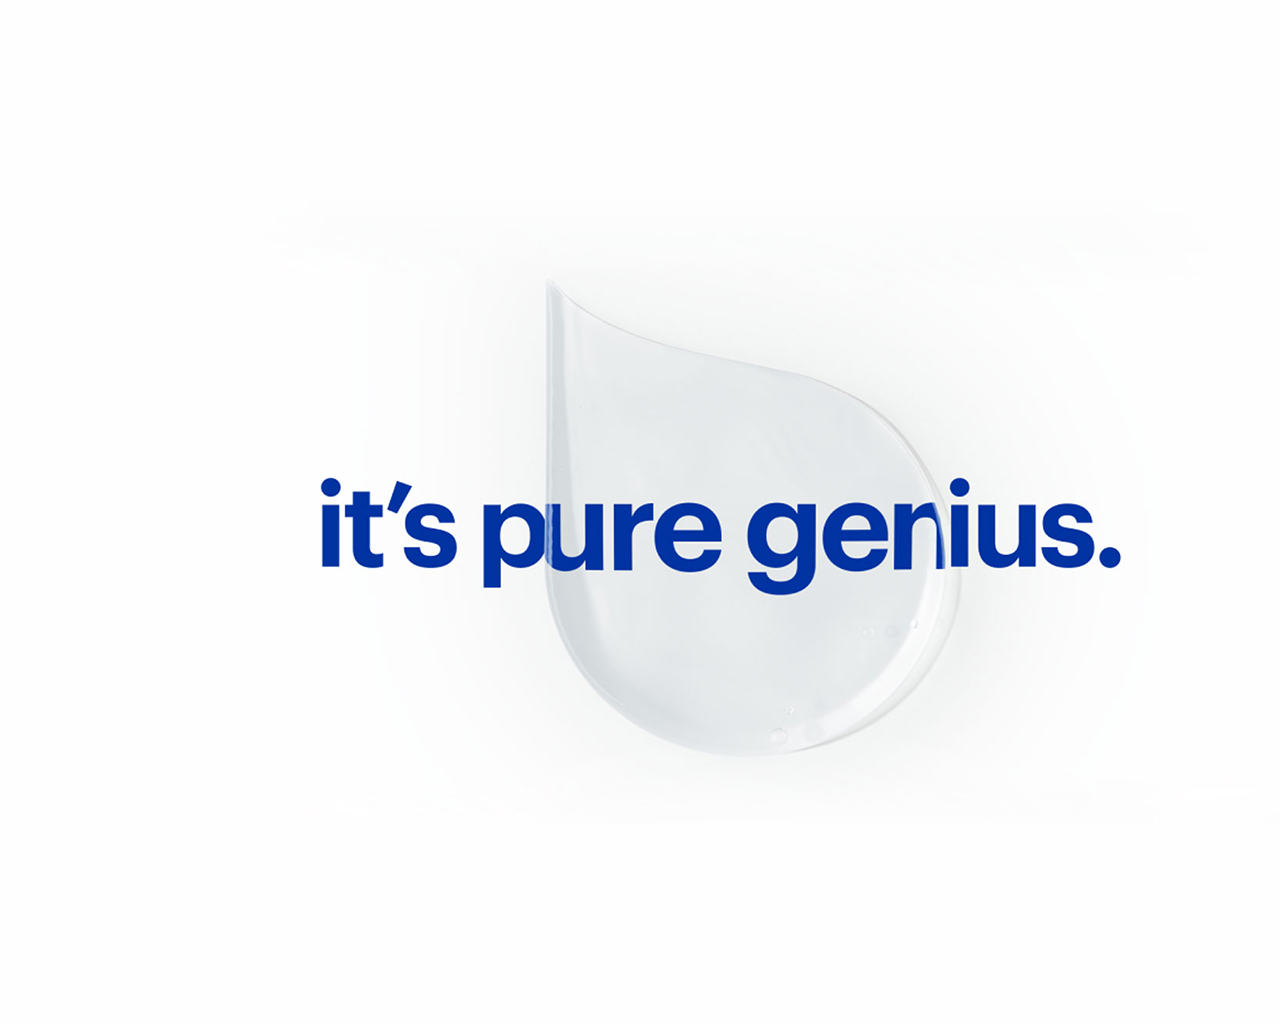 The phrase "it's pure genius." in front of a drop of water on with background